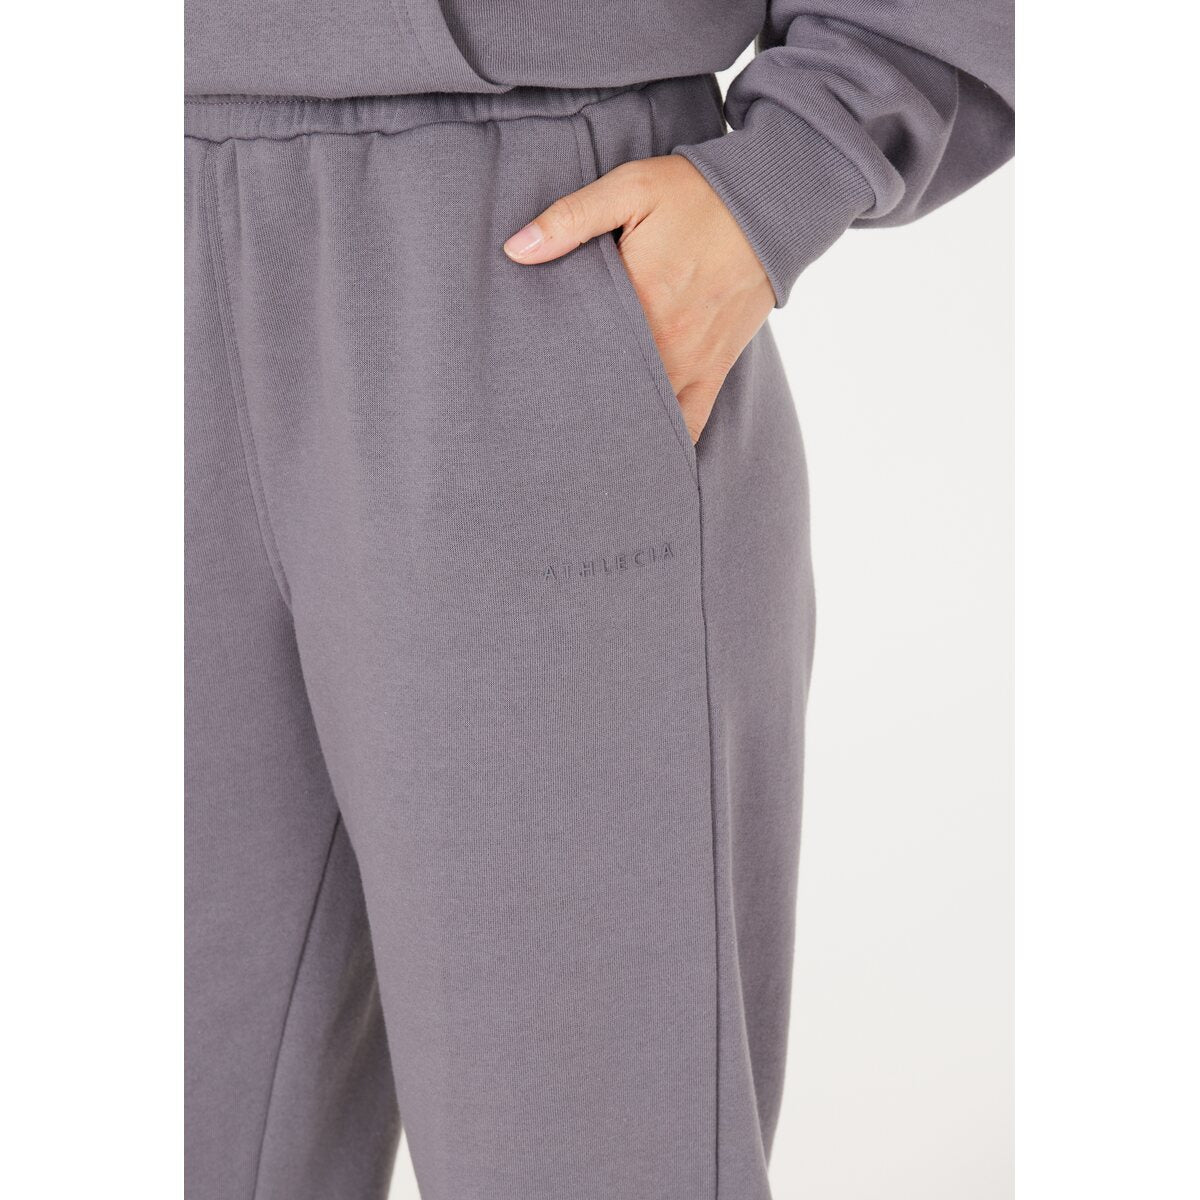 Athlecia Ruthie Womenswear Sweat Pants 3 Shaws Department Stores